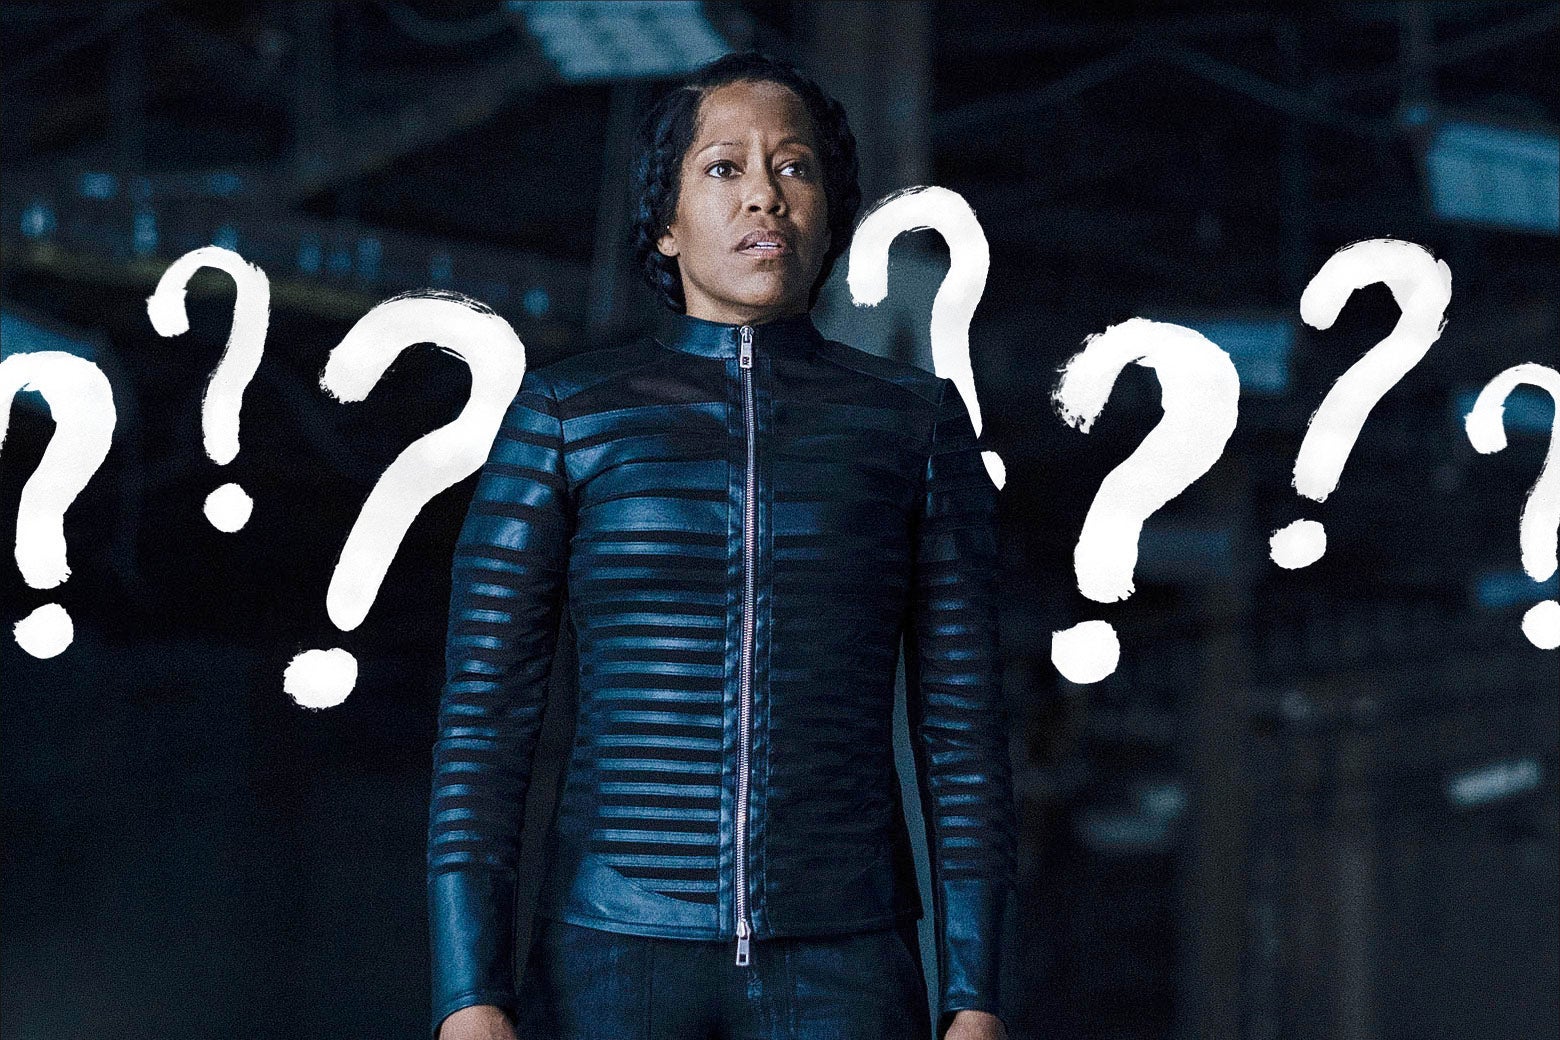 Regina King, in costume as Angela Abar from Watchmen, stands in a warehouse looking confused. Giant question marks are drawn all over the background.